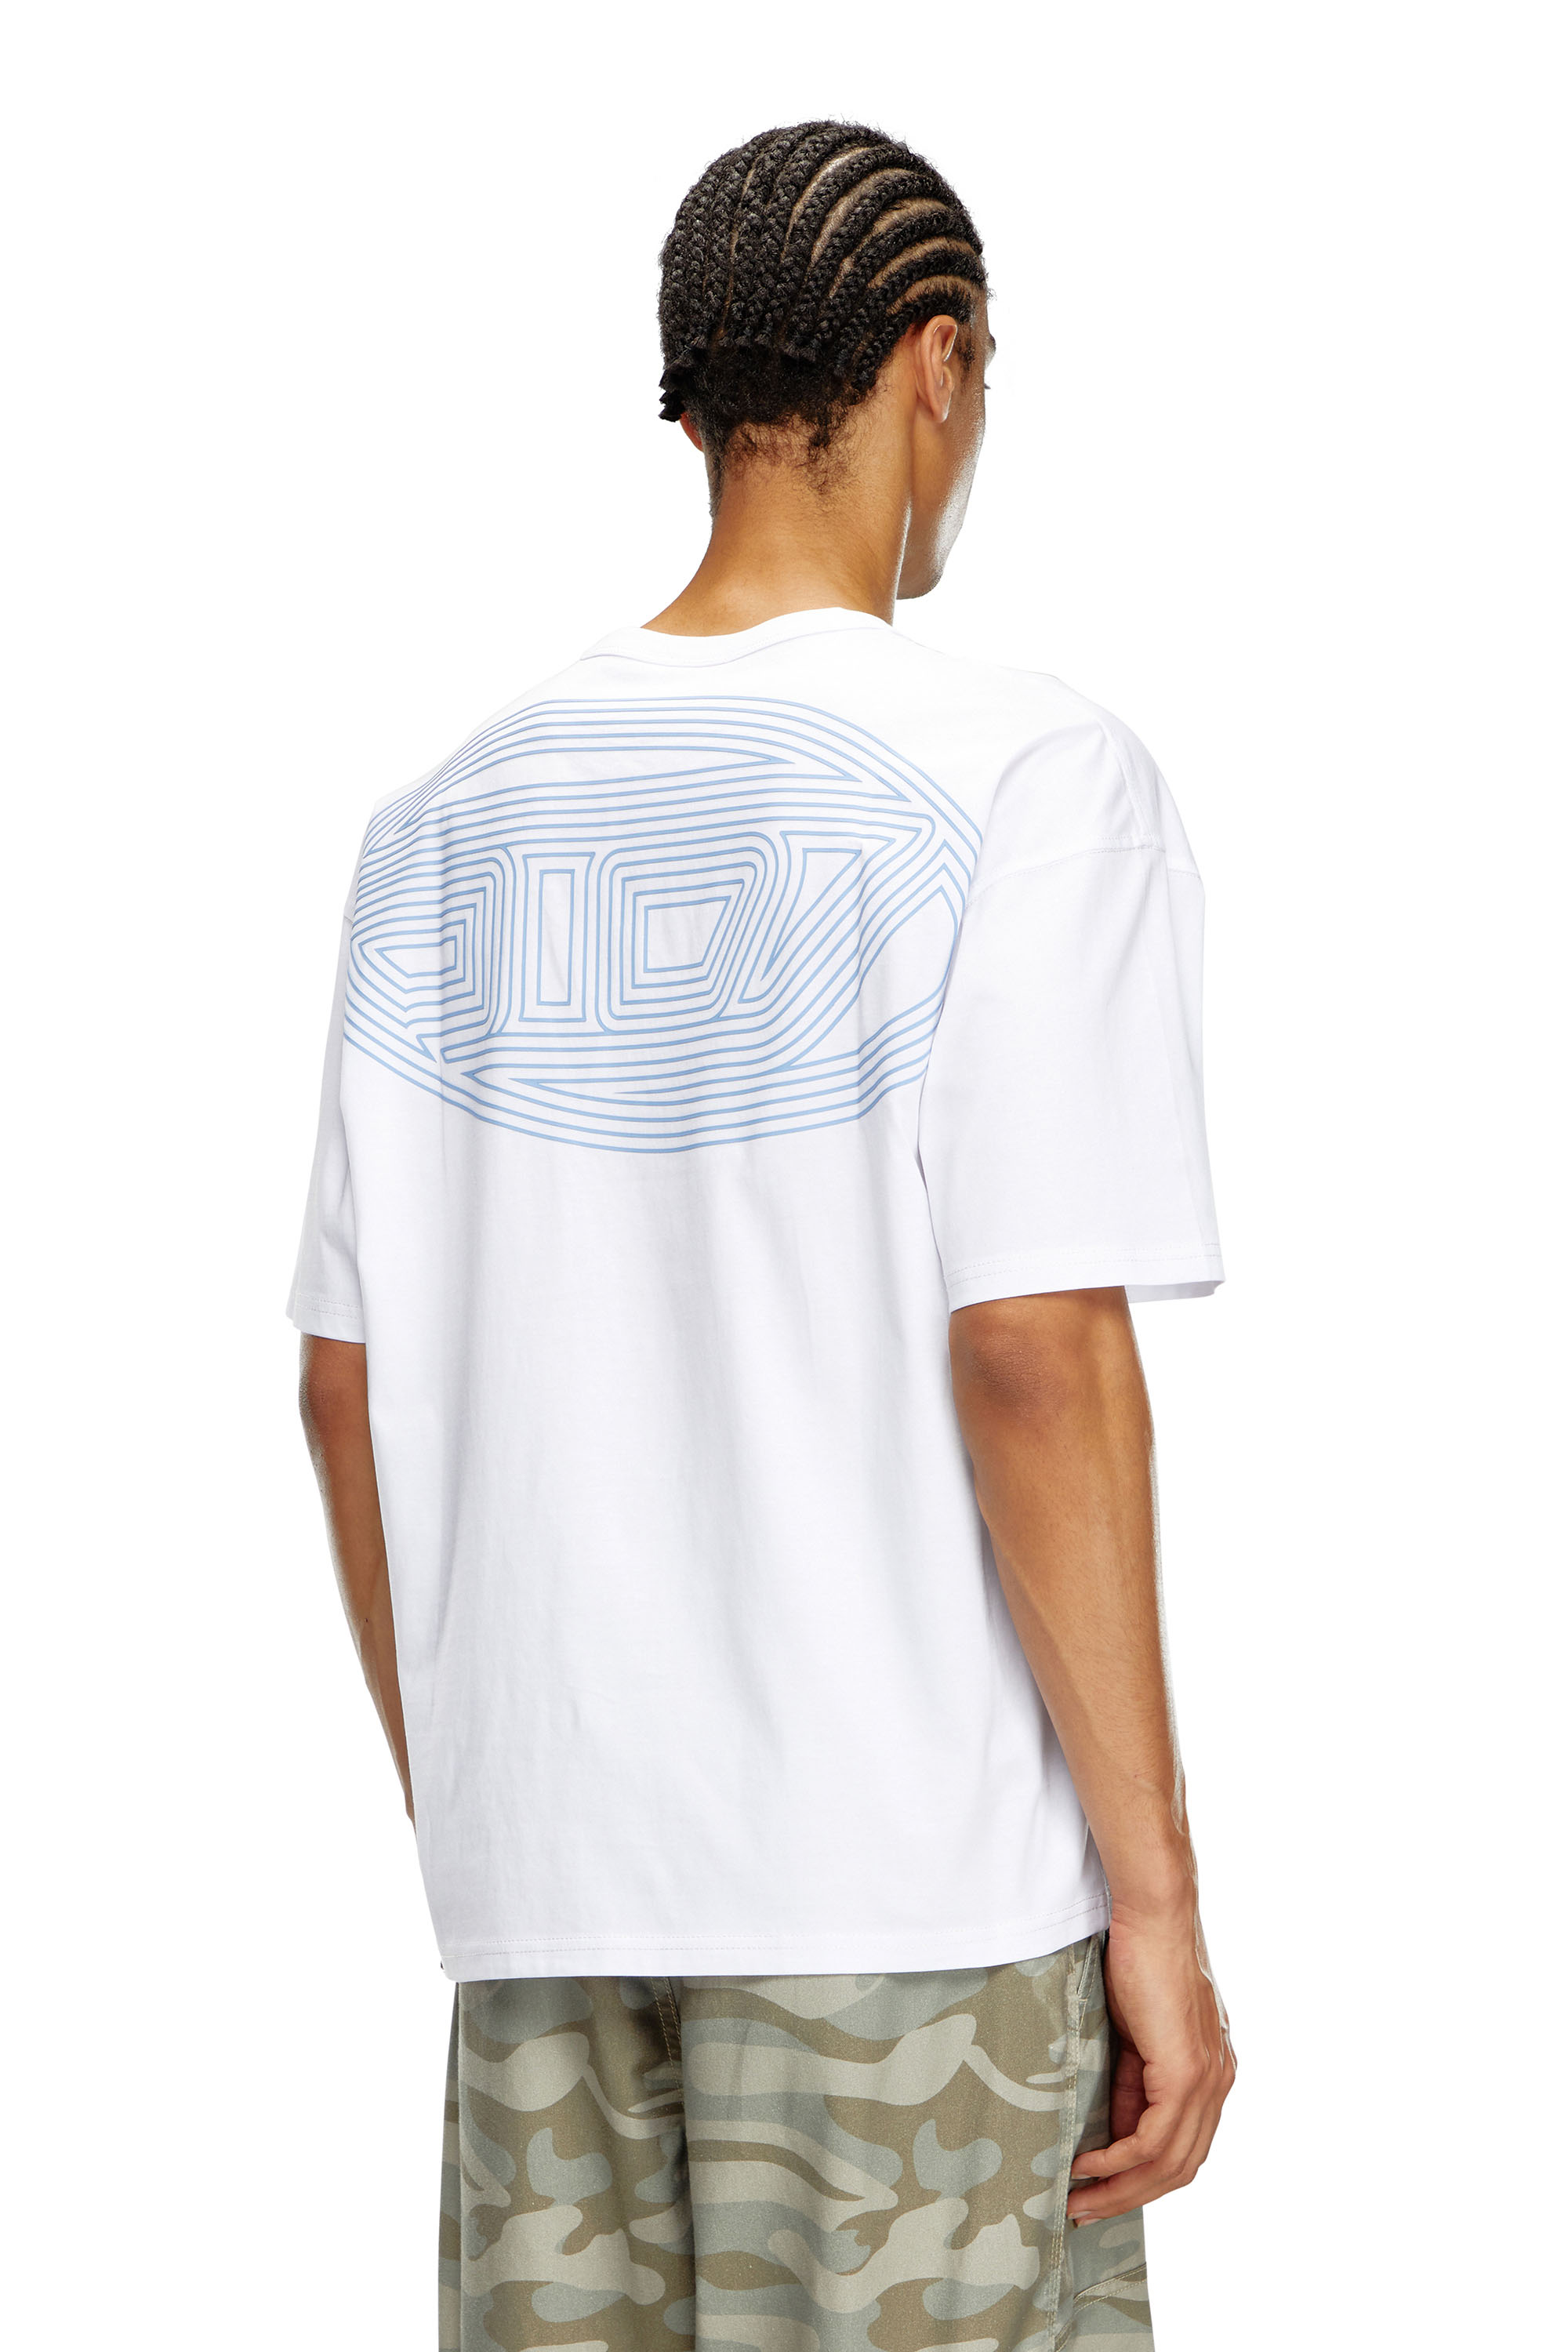 Diesel - T-BOXT-K18, Man T-shirt with Oval D print and embroidery in White - Image 4